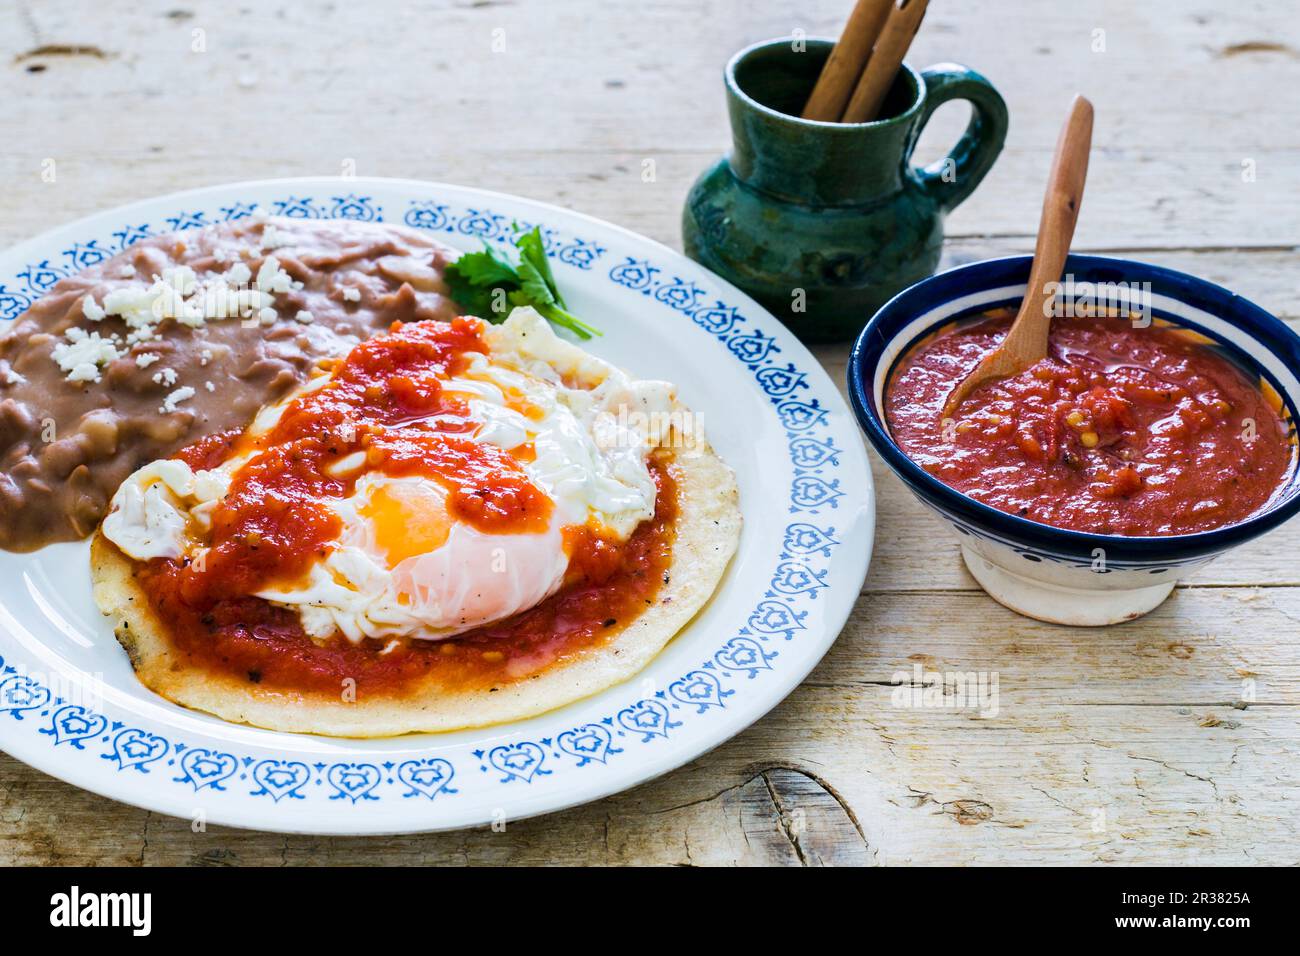 Huevos Rancheros (fried eggs on a corn tortilla with roasted beans and tomato sauce, Mexico) Stock Photo